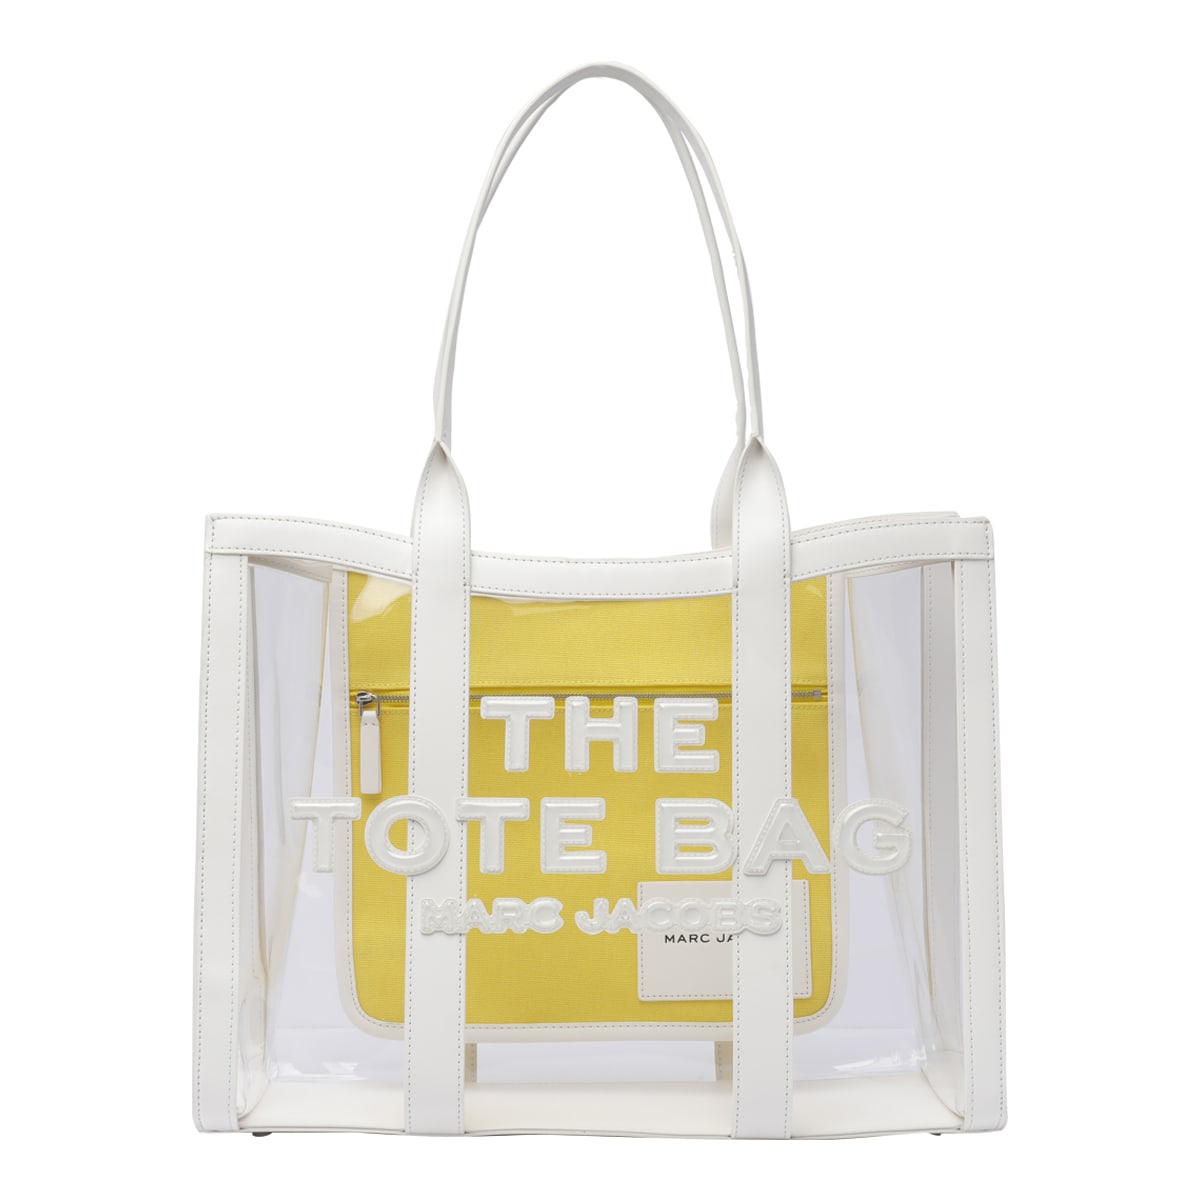 The Mesh Large Tote